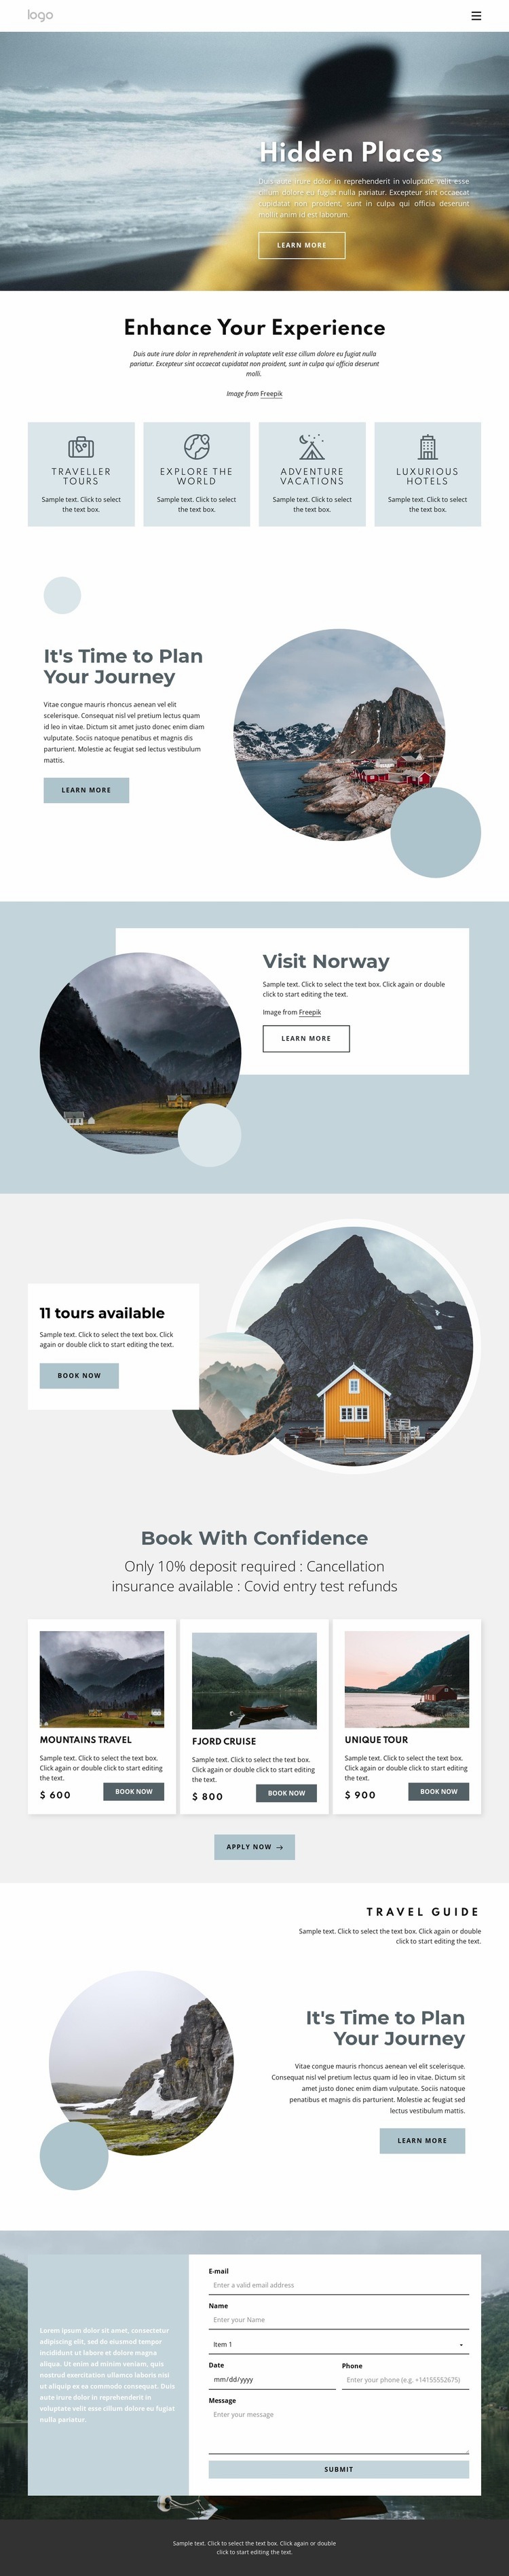 We find the hidden places Web Page Design